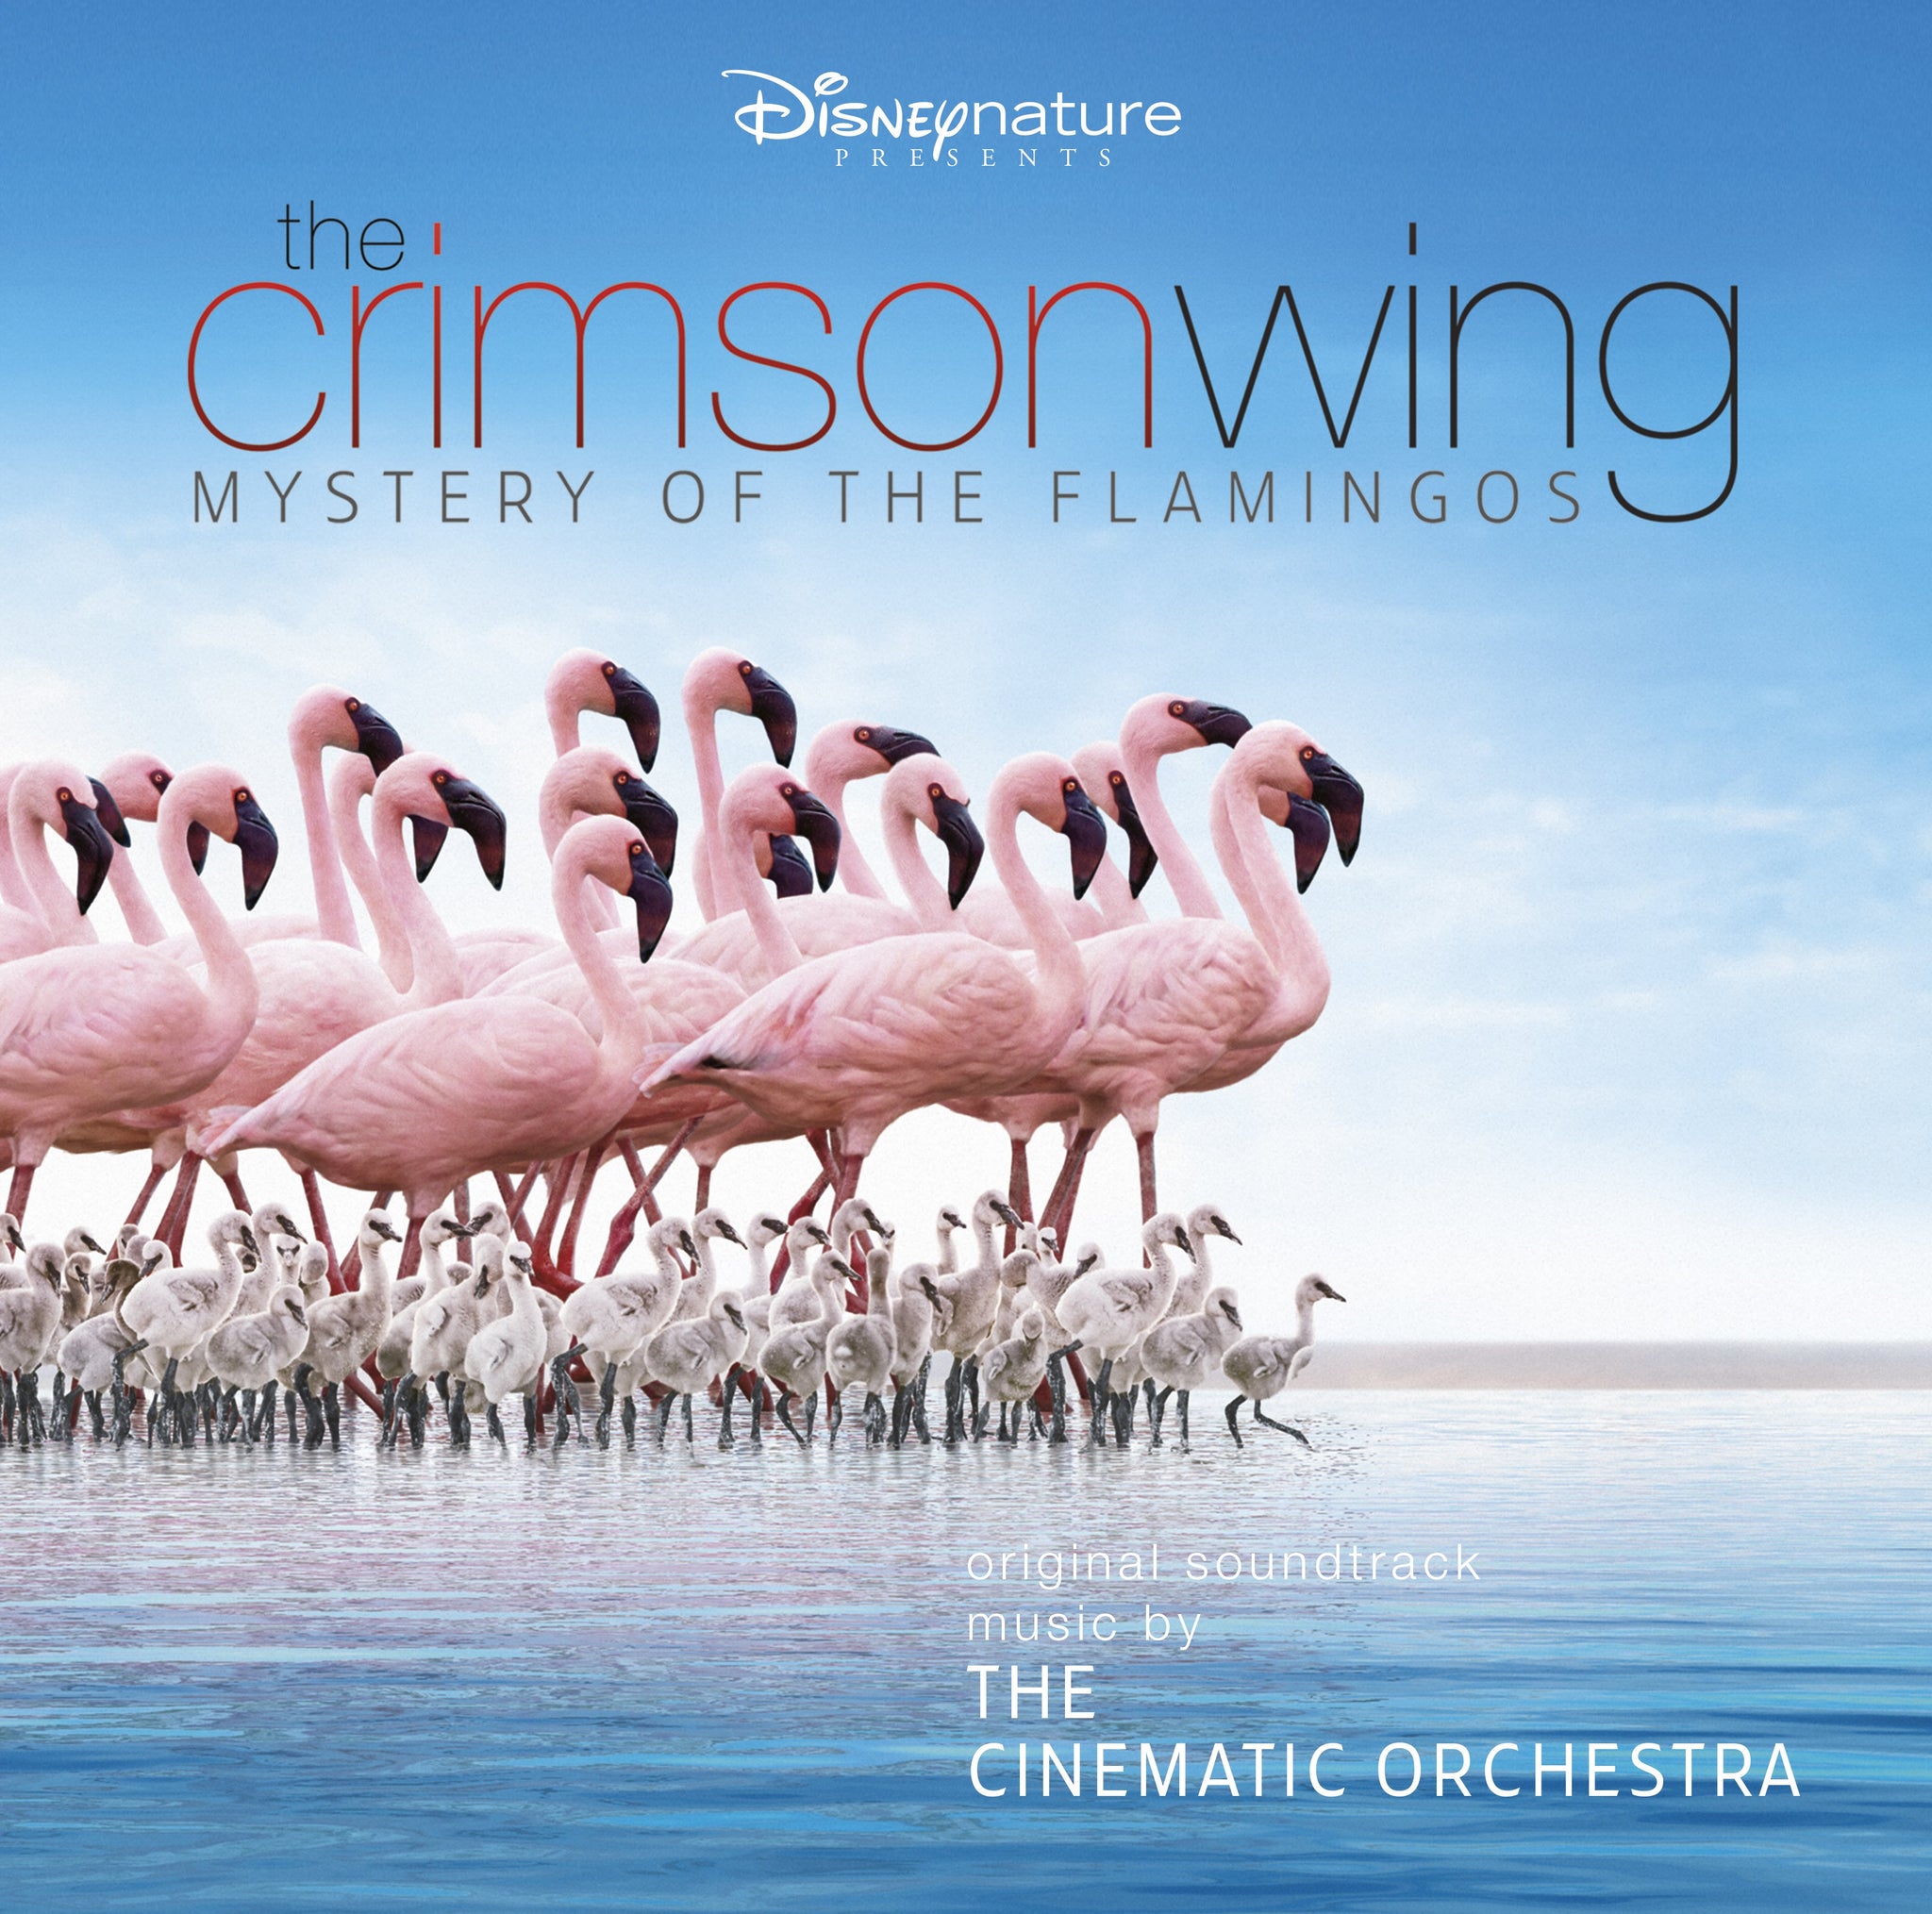 The Cinematic Orchestra with the London Metropolitan Orchestra - The Crimson Wing - Mystery of The Flamingoes (Coloured Vinyl)